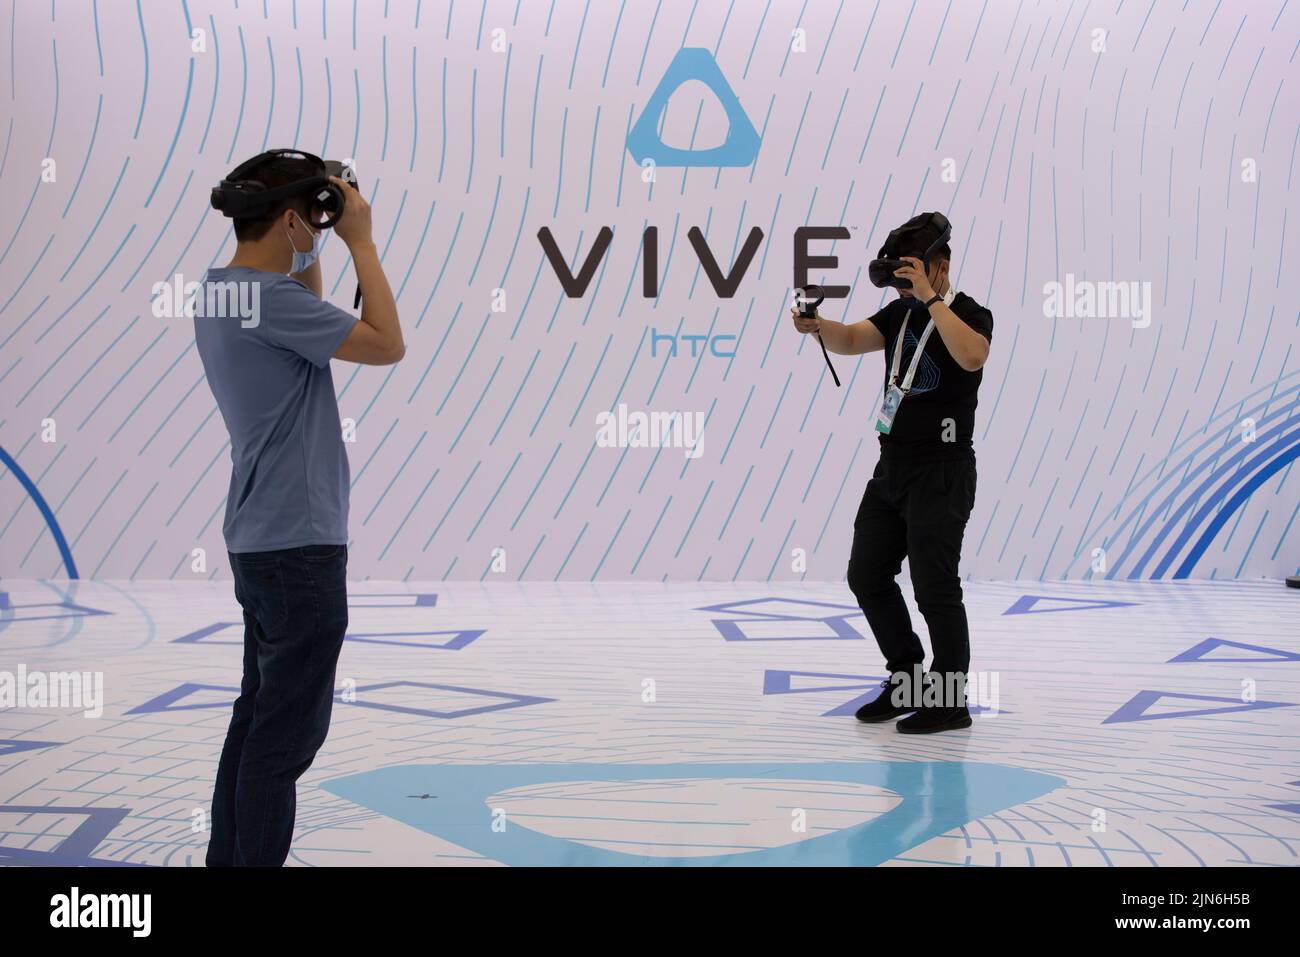 (220809) -- HARBIN, Aug. 9, 2022 (Xinhua) -- Staff members test devices at an exhibition booth during a media preview of the 2022 World 5G Convention in Harbin, capital of northeast China's Heilongjiang Province, Aug. 9, 2022. The 2022 World 5G Convention will be held here from August 10 to 12. (Xinhua/Zhang Tao) Stock Photo